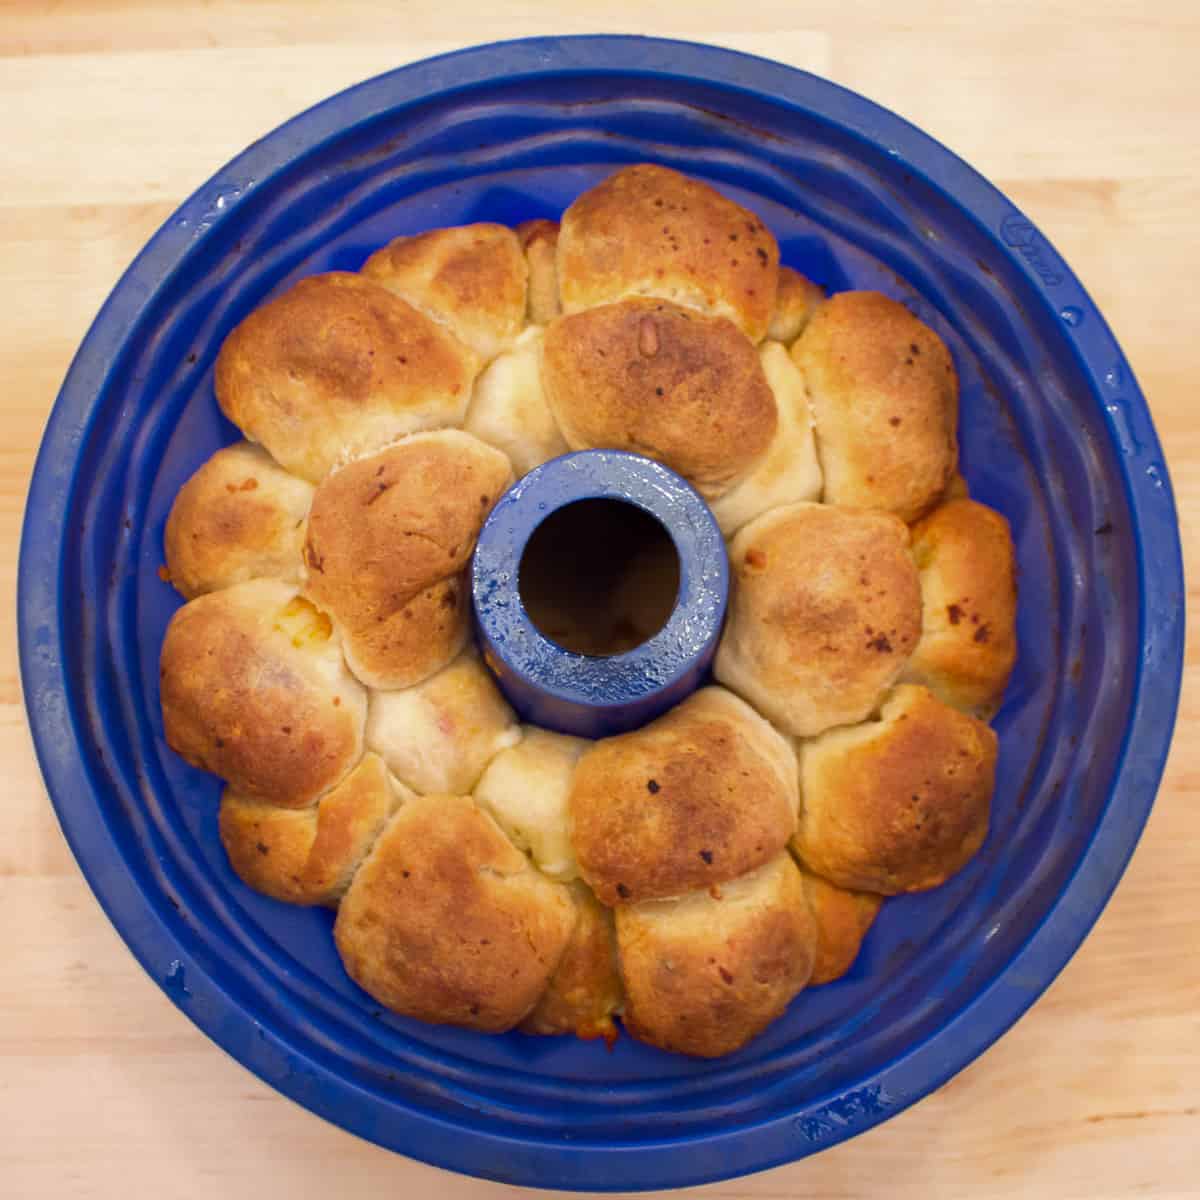 Monkey bread baked and ready to be removed from the bundt pan.